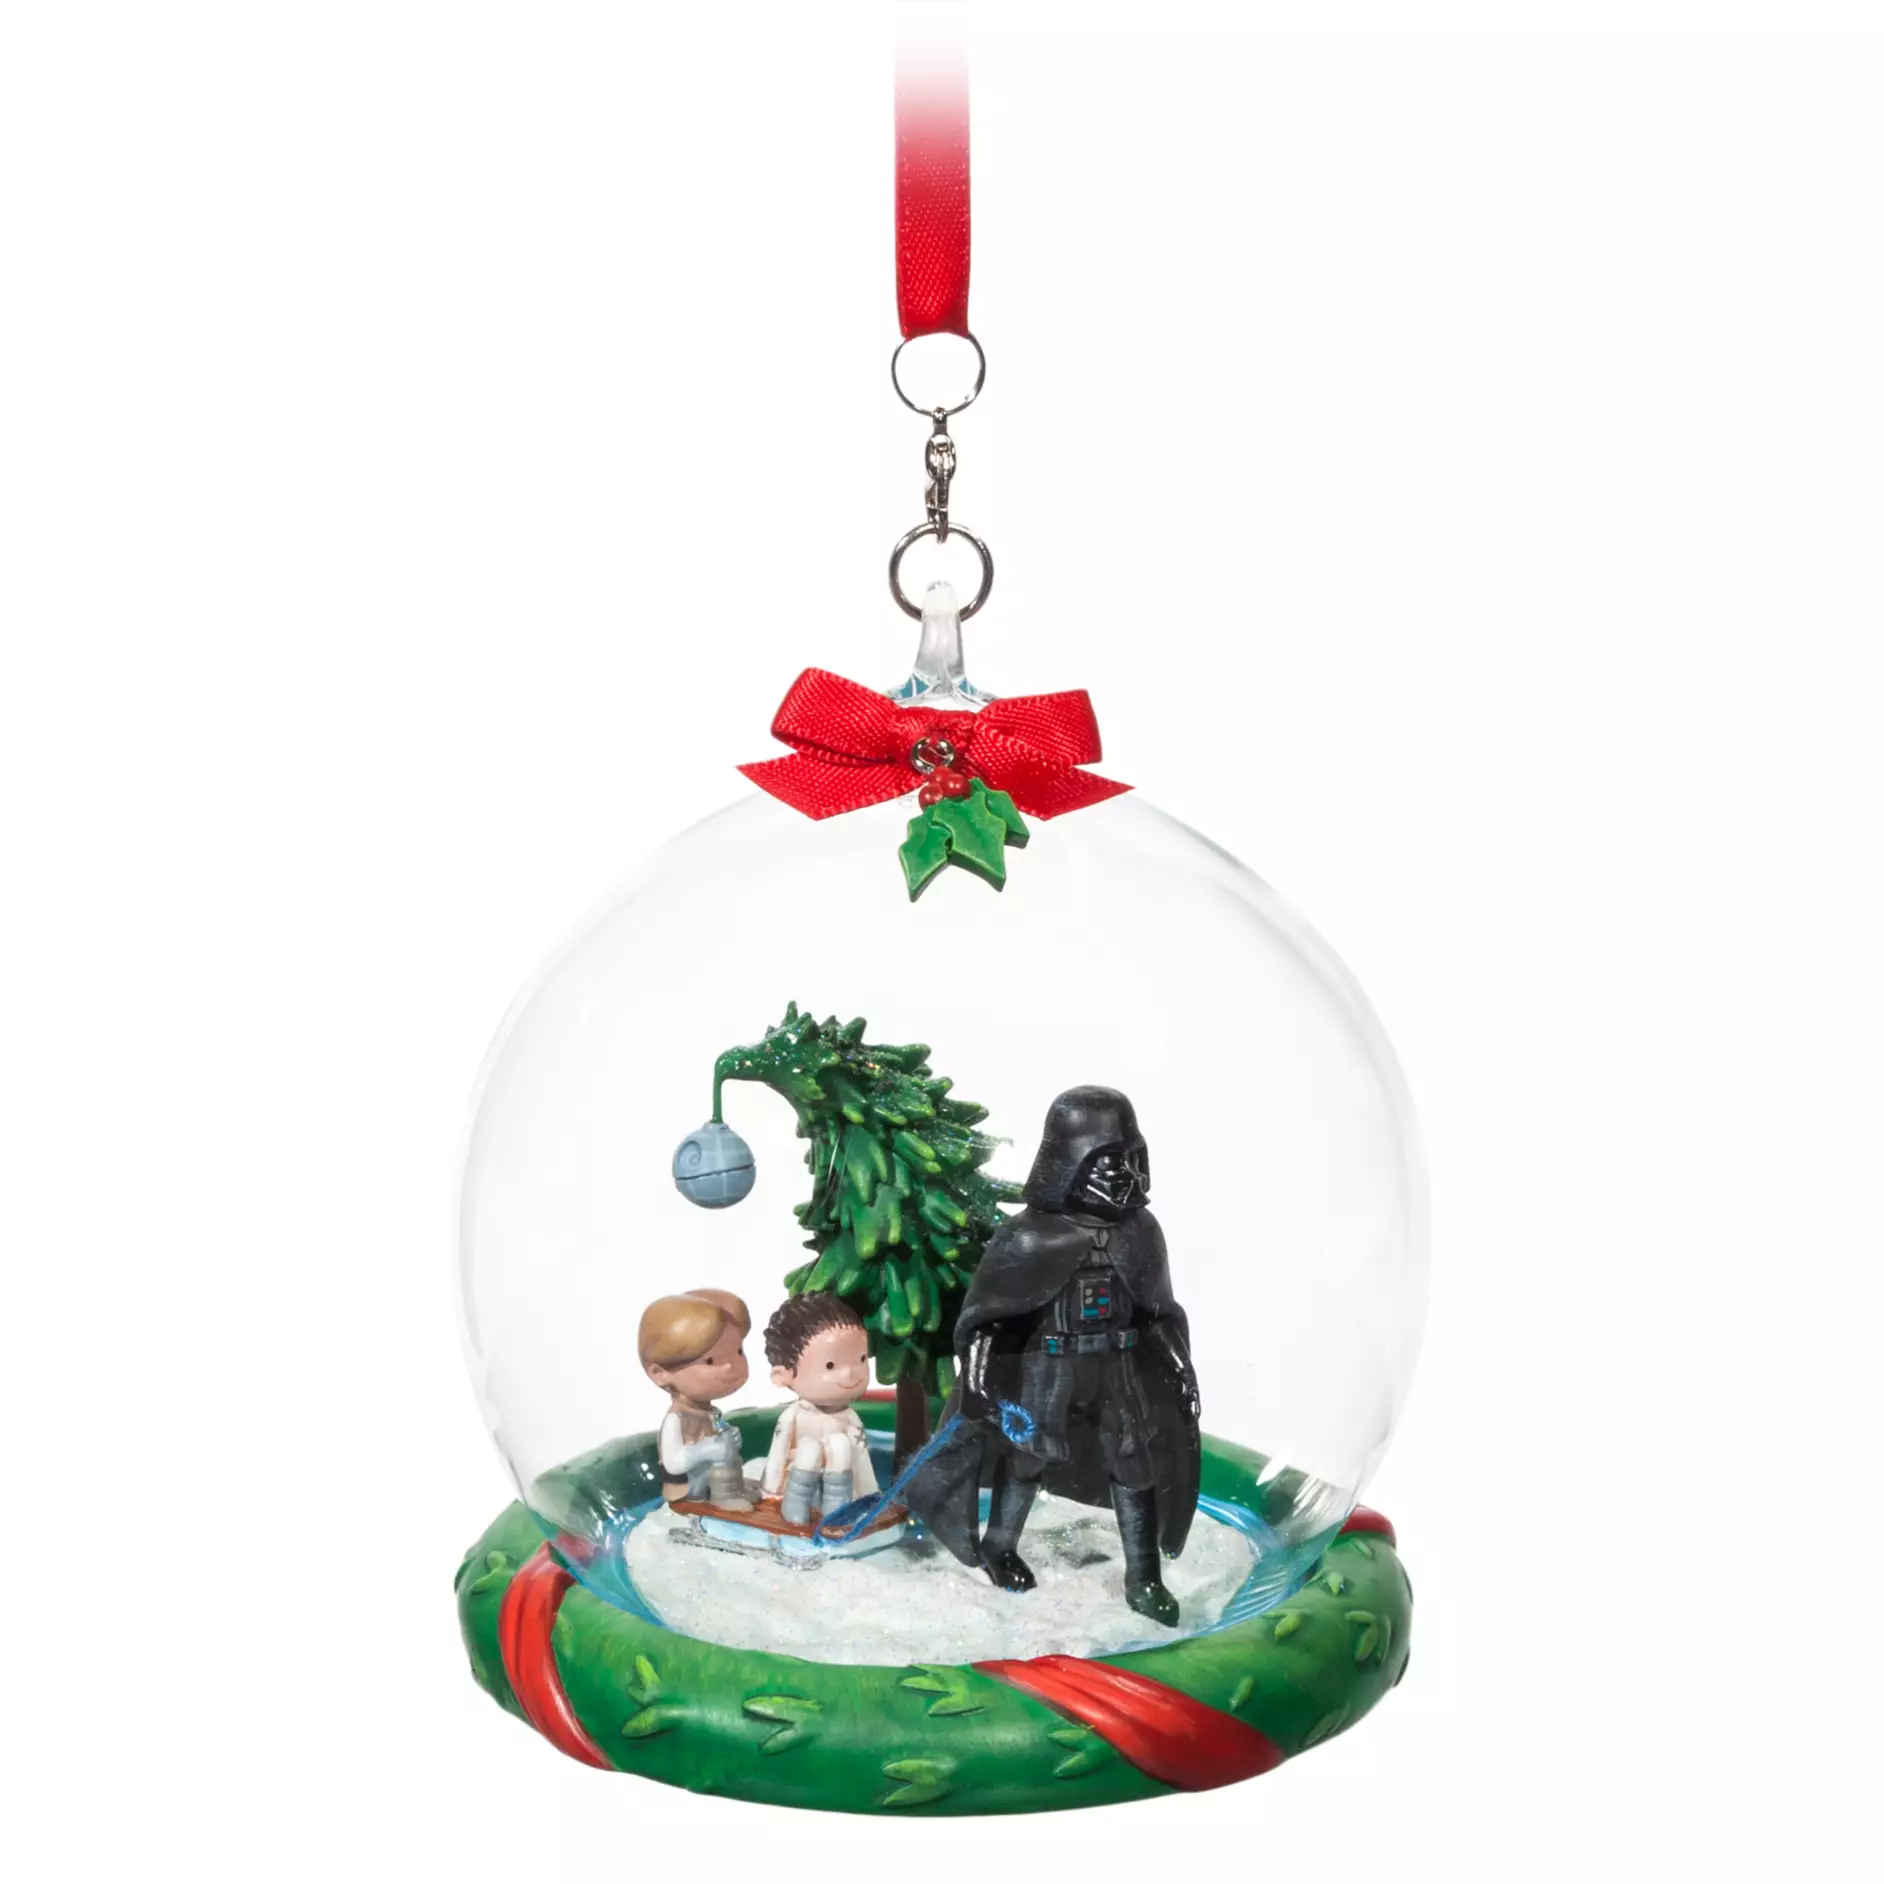 Gifts for Everyone in Your Family This Holiday Season from Disney, Marvel,  Star Wars and more